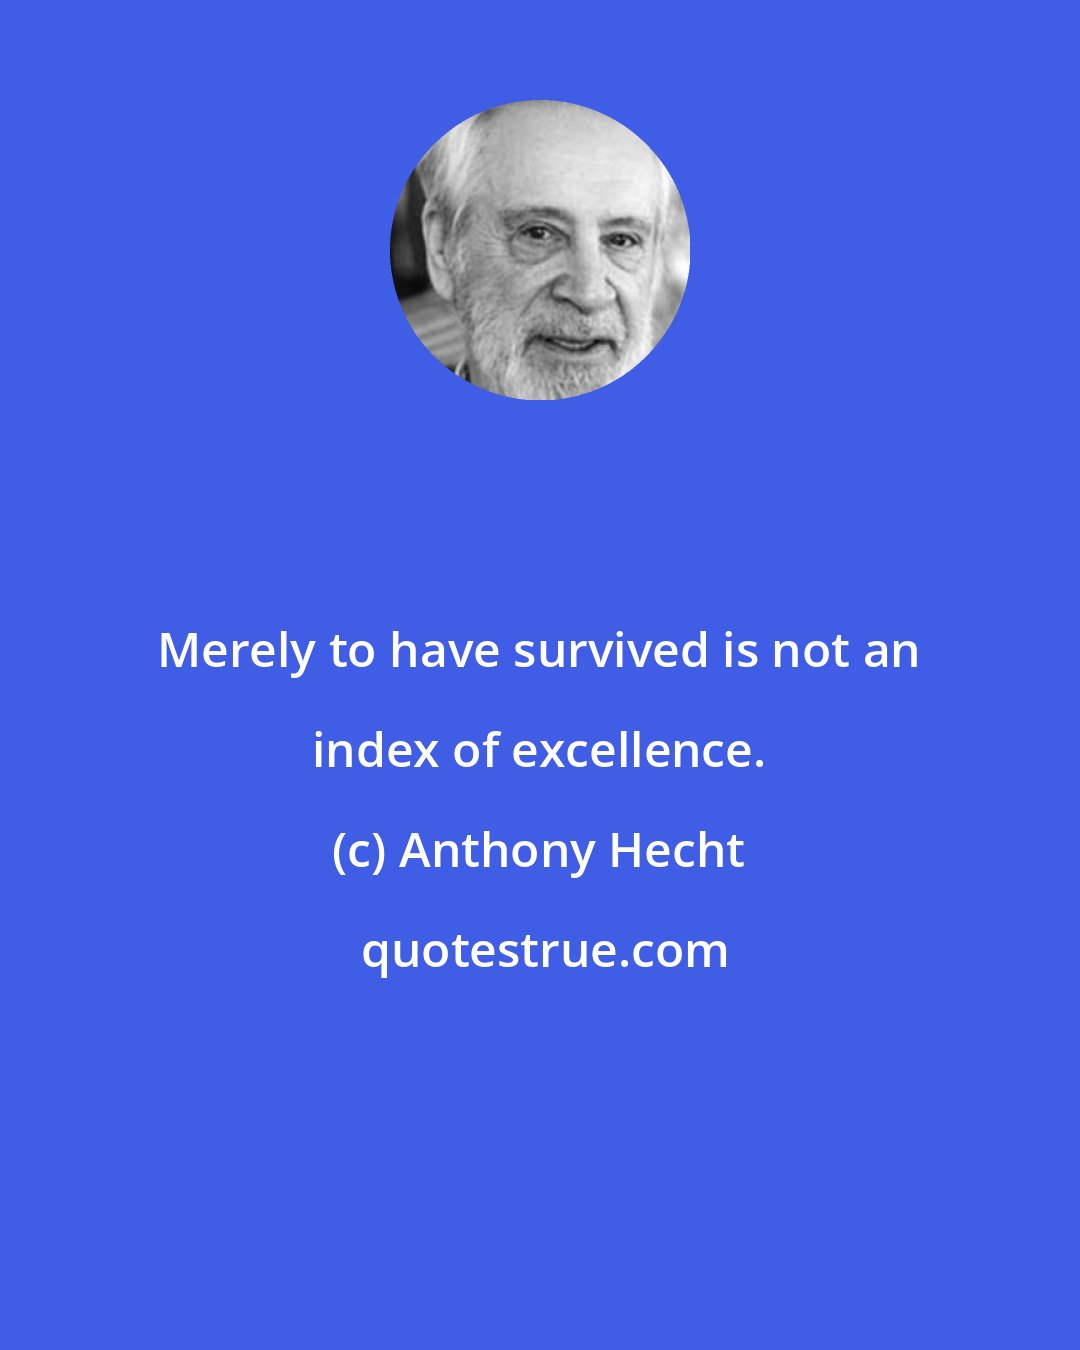 Anthony Hecht: Merely to have survived is not an index of excellence.